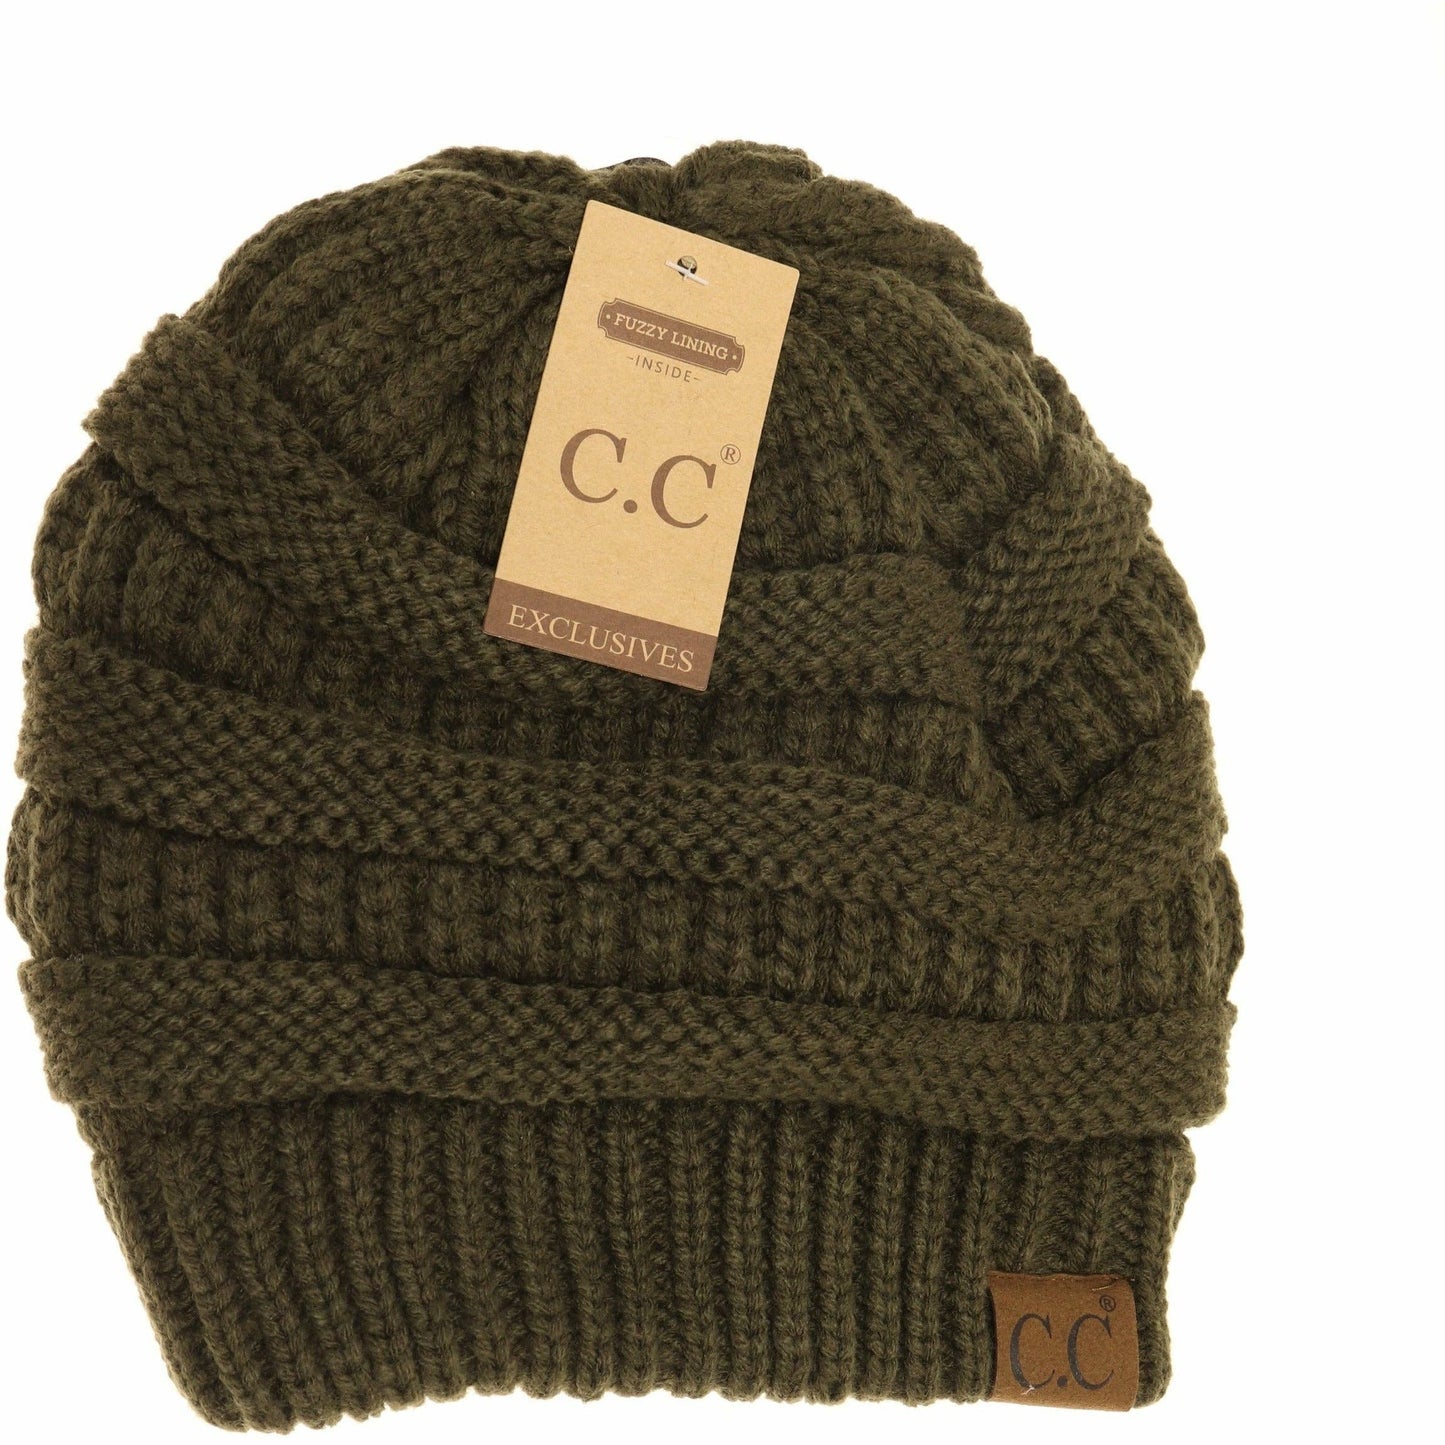 Classic Fuzzy Lined CC Beanie HAT25: Rose